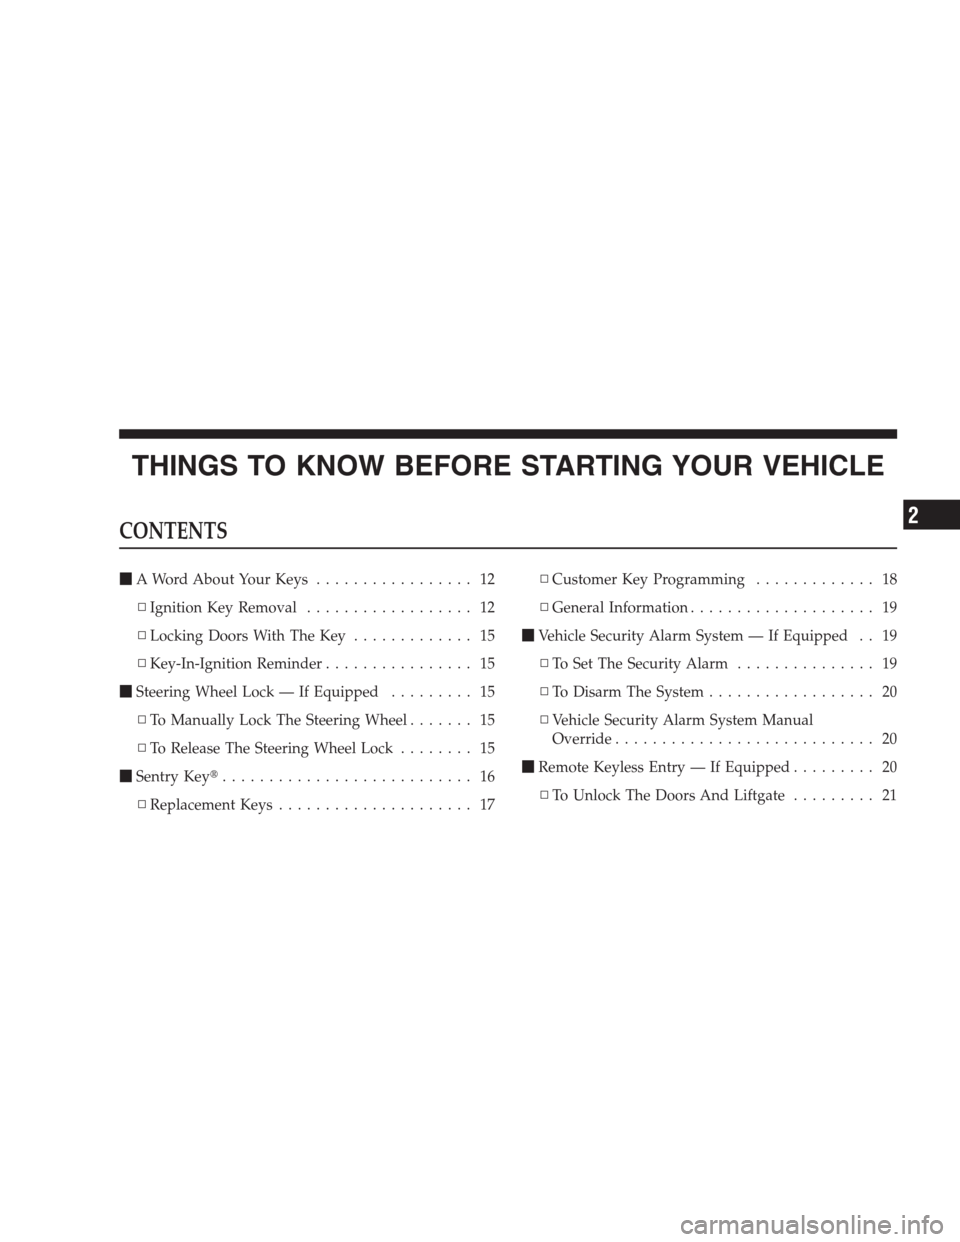 JEEP COMPASS 2009 1.G User Guide THINGS TO KNOW BEFORE STARTING YOUR VEHICLE
CONTENTS
A Word About Your Keys................. 12
▫Ignition Key Removal.................. 12
▫Locking Doors With The Key............. 15
▫Key-In-Ig